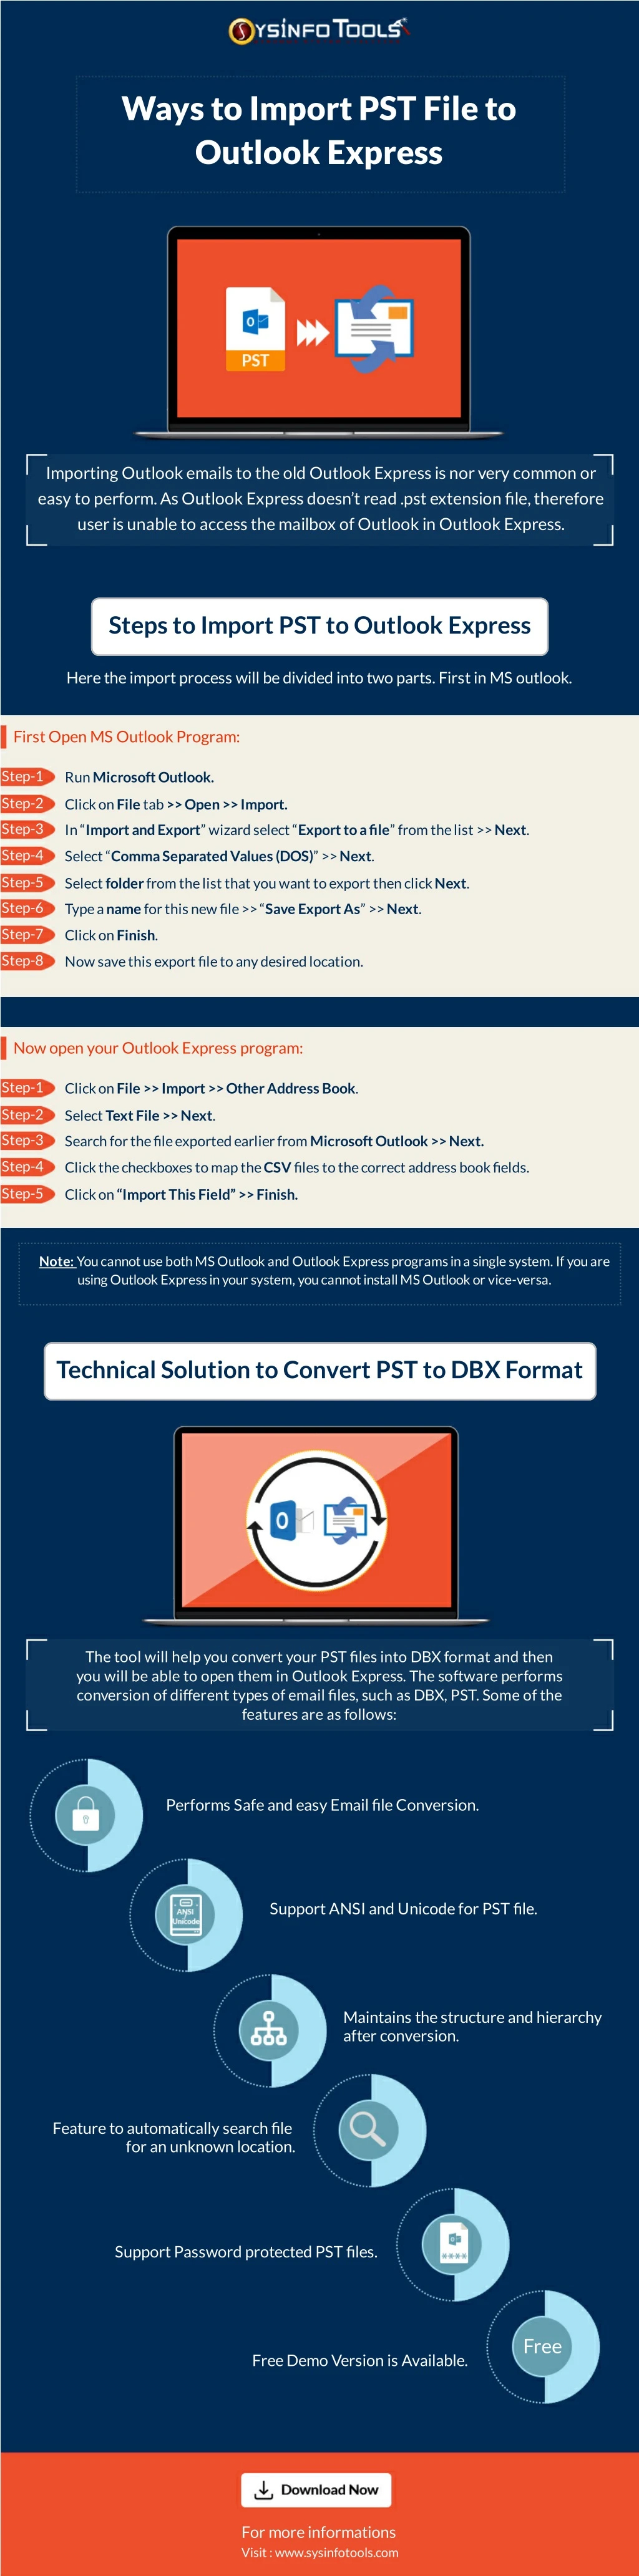 ways to import pst file to outlook express